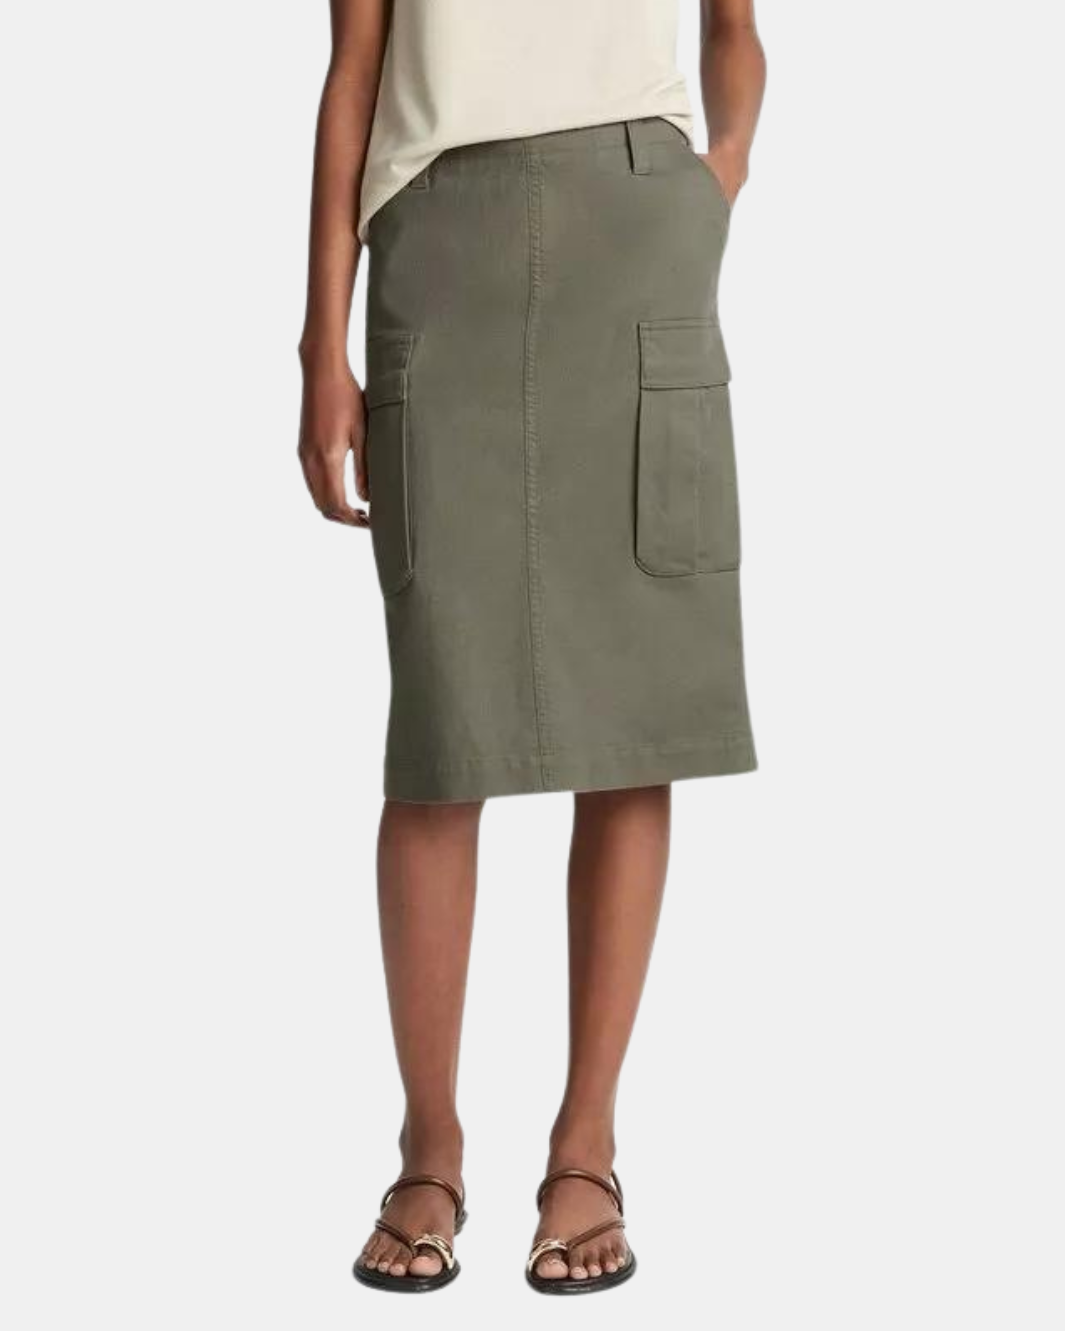 UTILITY CARGO SKIRT IN NIGHT PINE - Romi Boutique